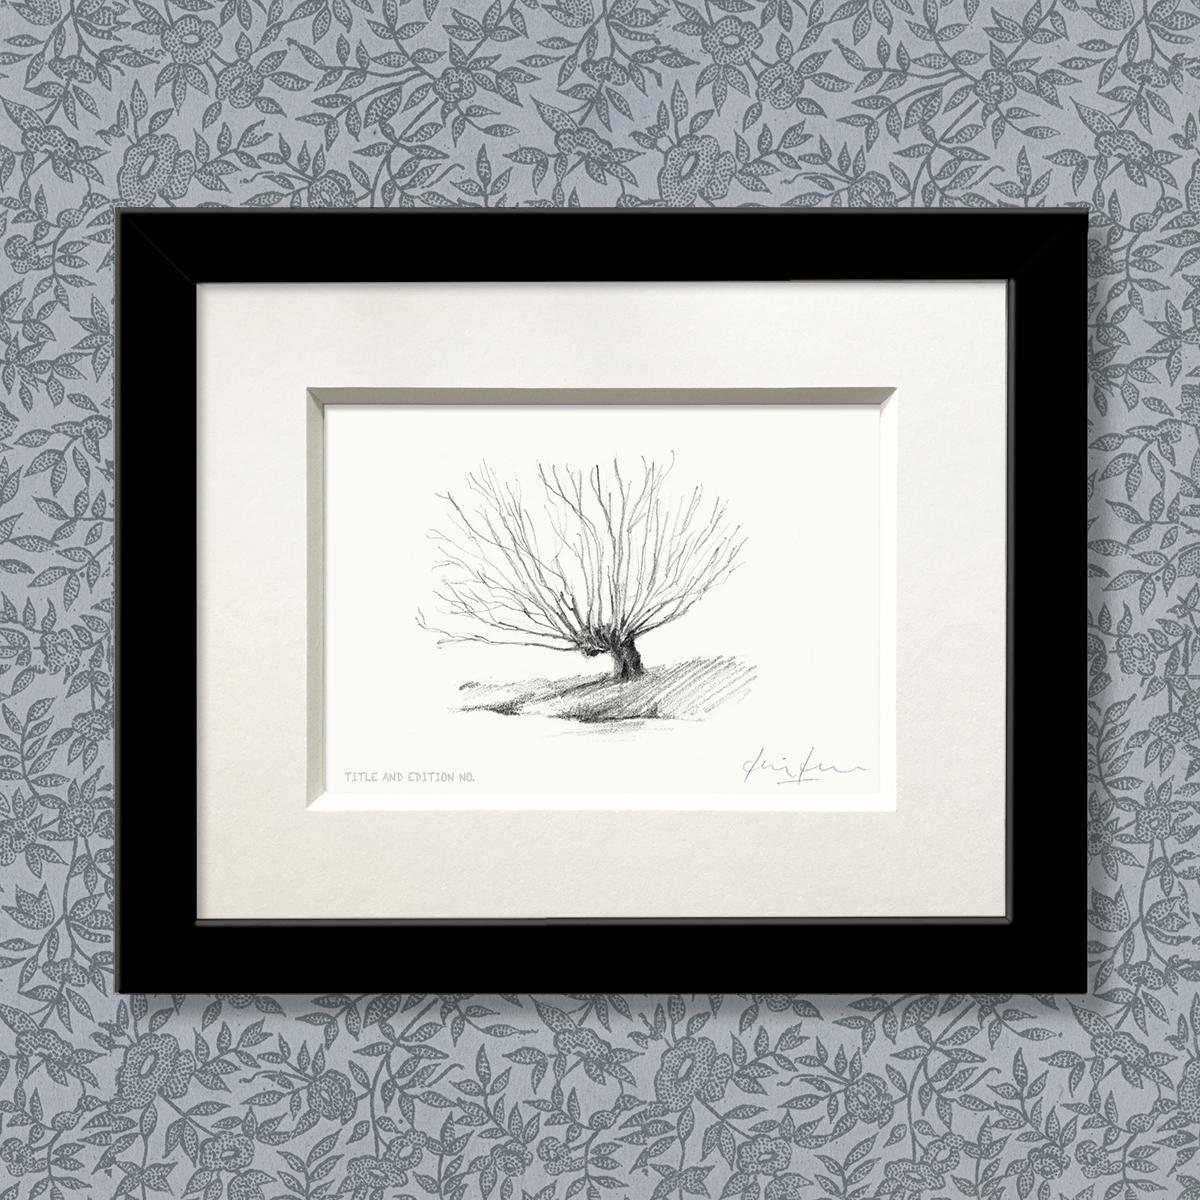 Limited edition print from pencil sketch of a willow tree in a black frame